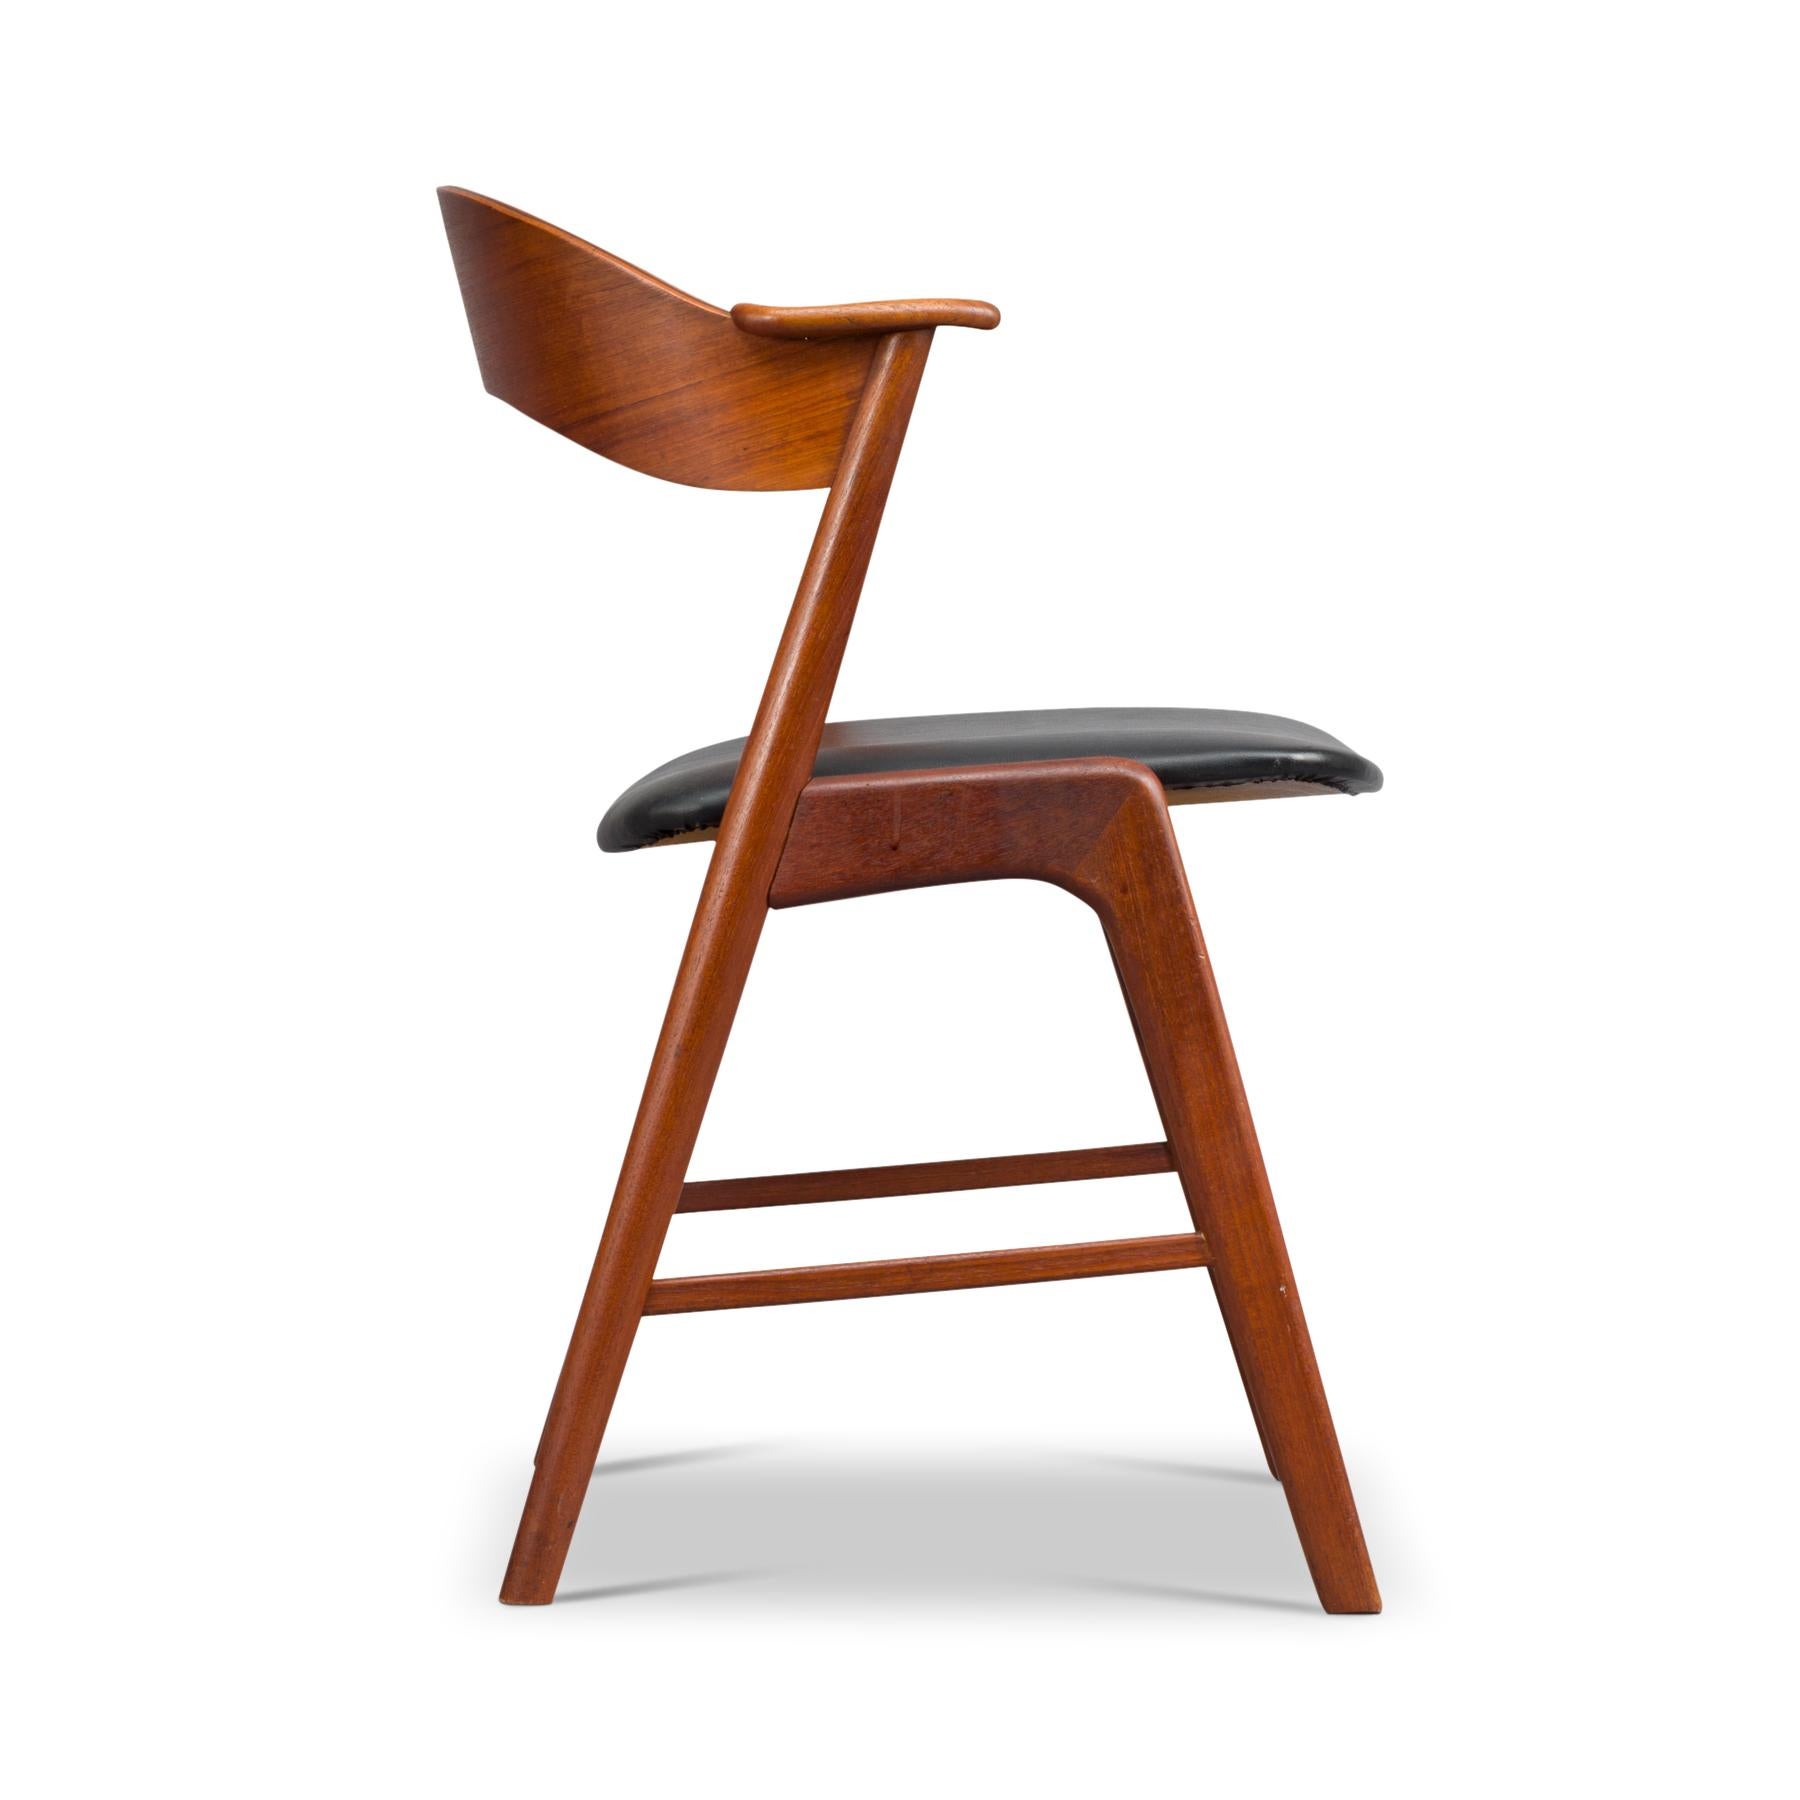 A typical Kai Kristiansen design style on this elegantly cut dining chair. Kristiansen selected his typical backrest and armrest connected to the backlegs construction. We call this chair simply the ply back chair because of the teak 1 cm thick